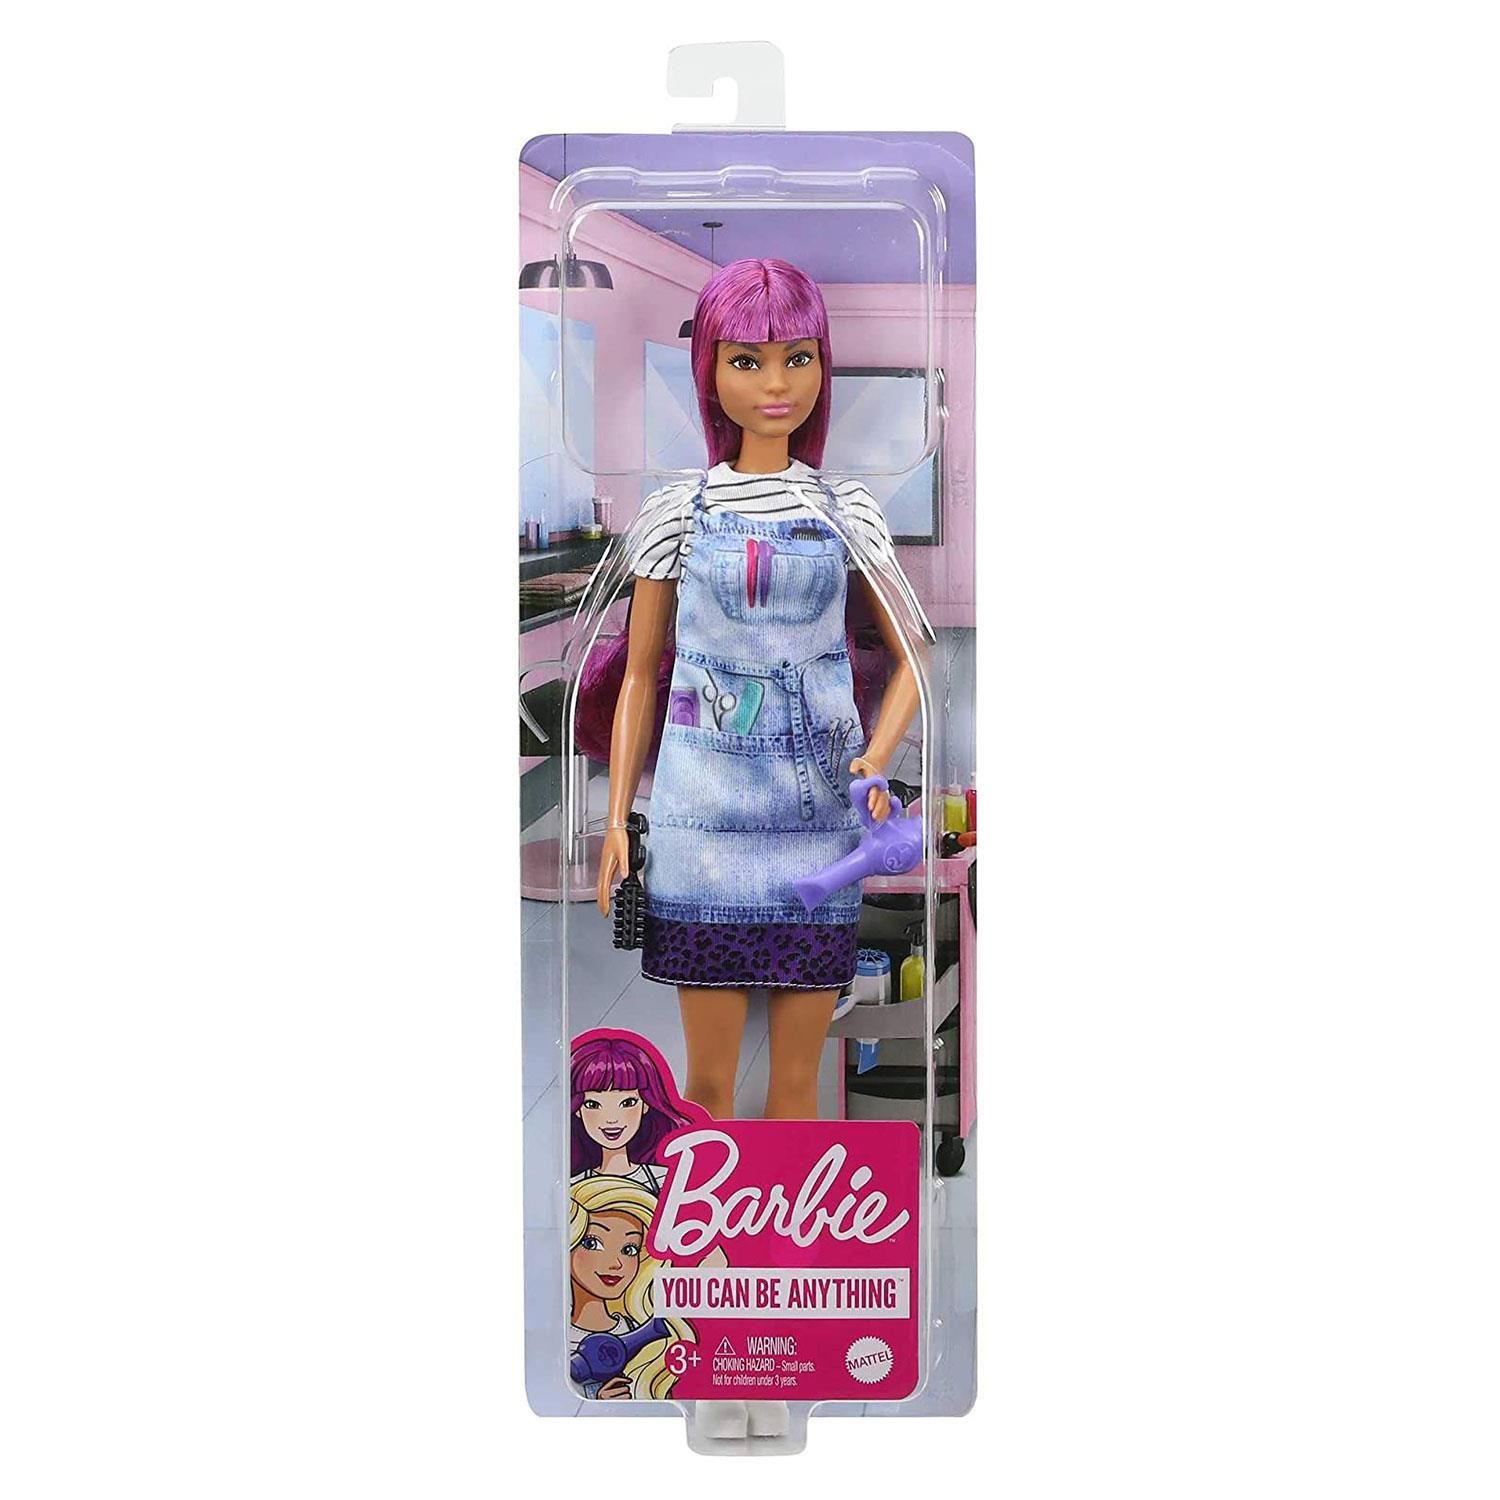 Barbie Careers Hair Stylist Doll with Accessories, Great Toy Gift For 3 Years Old & Up

Explore a world of hairstyling fun with the Barbie salon stylist doll! When a girl plays with Barbie, she imagines everything she can become, and if you love cutting and styling hair, you can be a salon stylist! The Barbie salon stylist doll (12-in/30.40-cm) wears a cute striped tee and a tie-dye smock, comfy shoes and has long purple hair. She comes with a blow dryer and brush (clips let the doll hold them) plus two hair clips. Kids will love the endless possibilities for creative expression and storytelling fun. Doll cannot stand alone. Colours and decorations may vary. Makes a great gift for ages 3 years old and up.

Features:

Explore hairstyling fun with the Barbie salon stylist doll and related accessories!
Wearing a tie-dye smock, striped tee and comfy shoes, the Barbie salon stylist doll (12-in/30.40-cm) is ready to make her clients look they're very best!
Barbie salon stylist doll can hold the blow dryer and brush to style hair in a variety of fun looks!
Explore a world of creative play and storytelling fun with the Barbie salon stylist doll!
Makes a great gift for kids 3 years old and up, especially those interested in hair styling, fashion play and creativity!

Specifications:

Toy Type: Barbie Salon Stylist Doll
Colour: Blue
Material: Abs Plastic
Age Range:  3 Years & Above

Box Contains:

1x Barbie Hair Stylist Doll 
1x Blow Dryer 
1x Brush